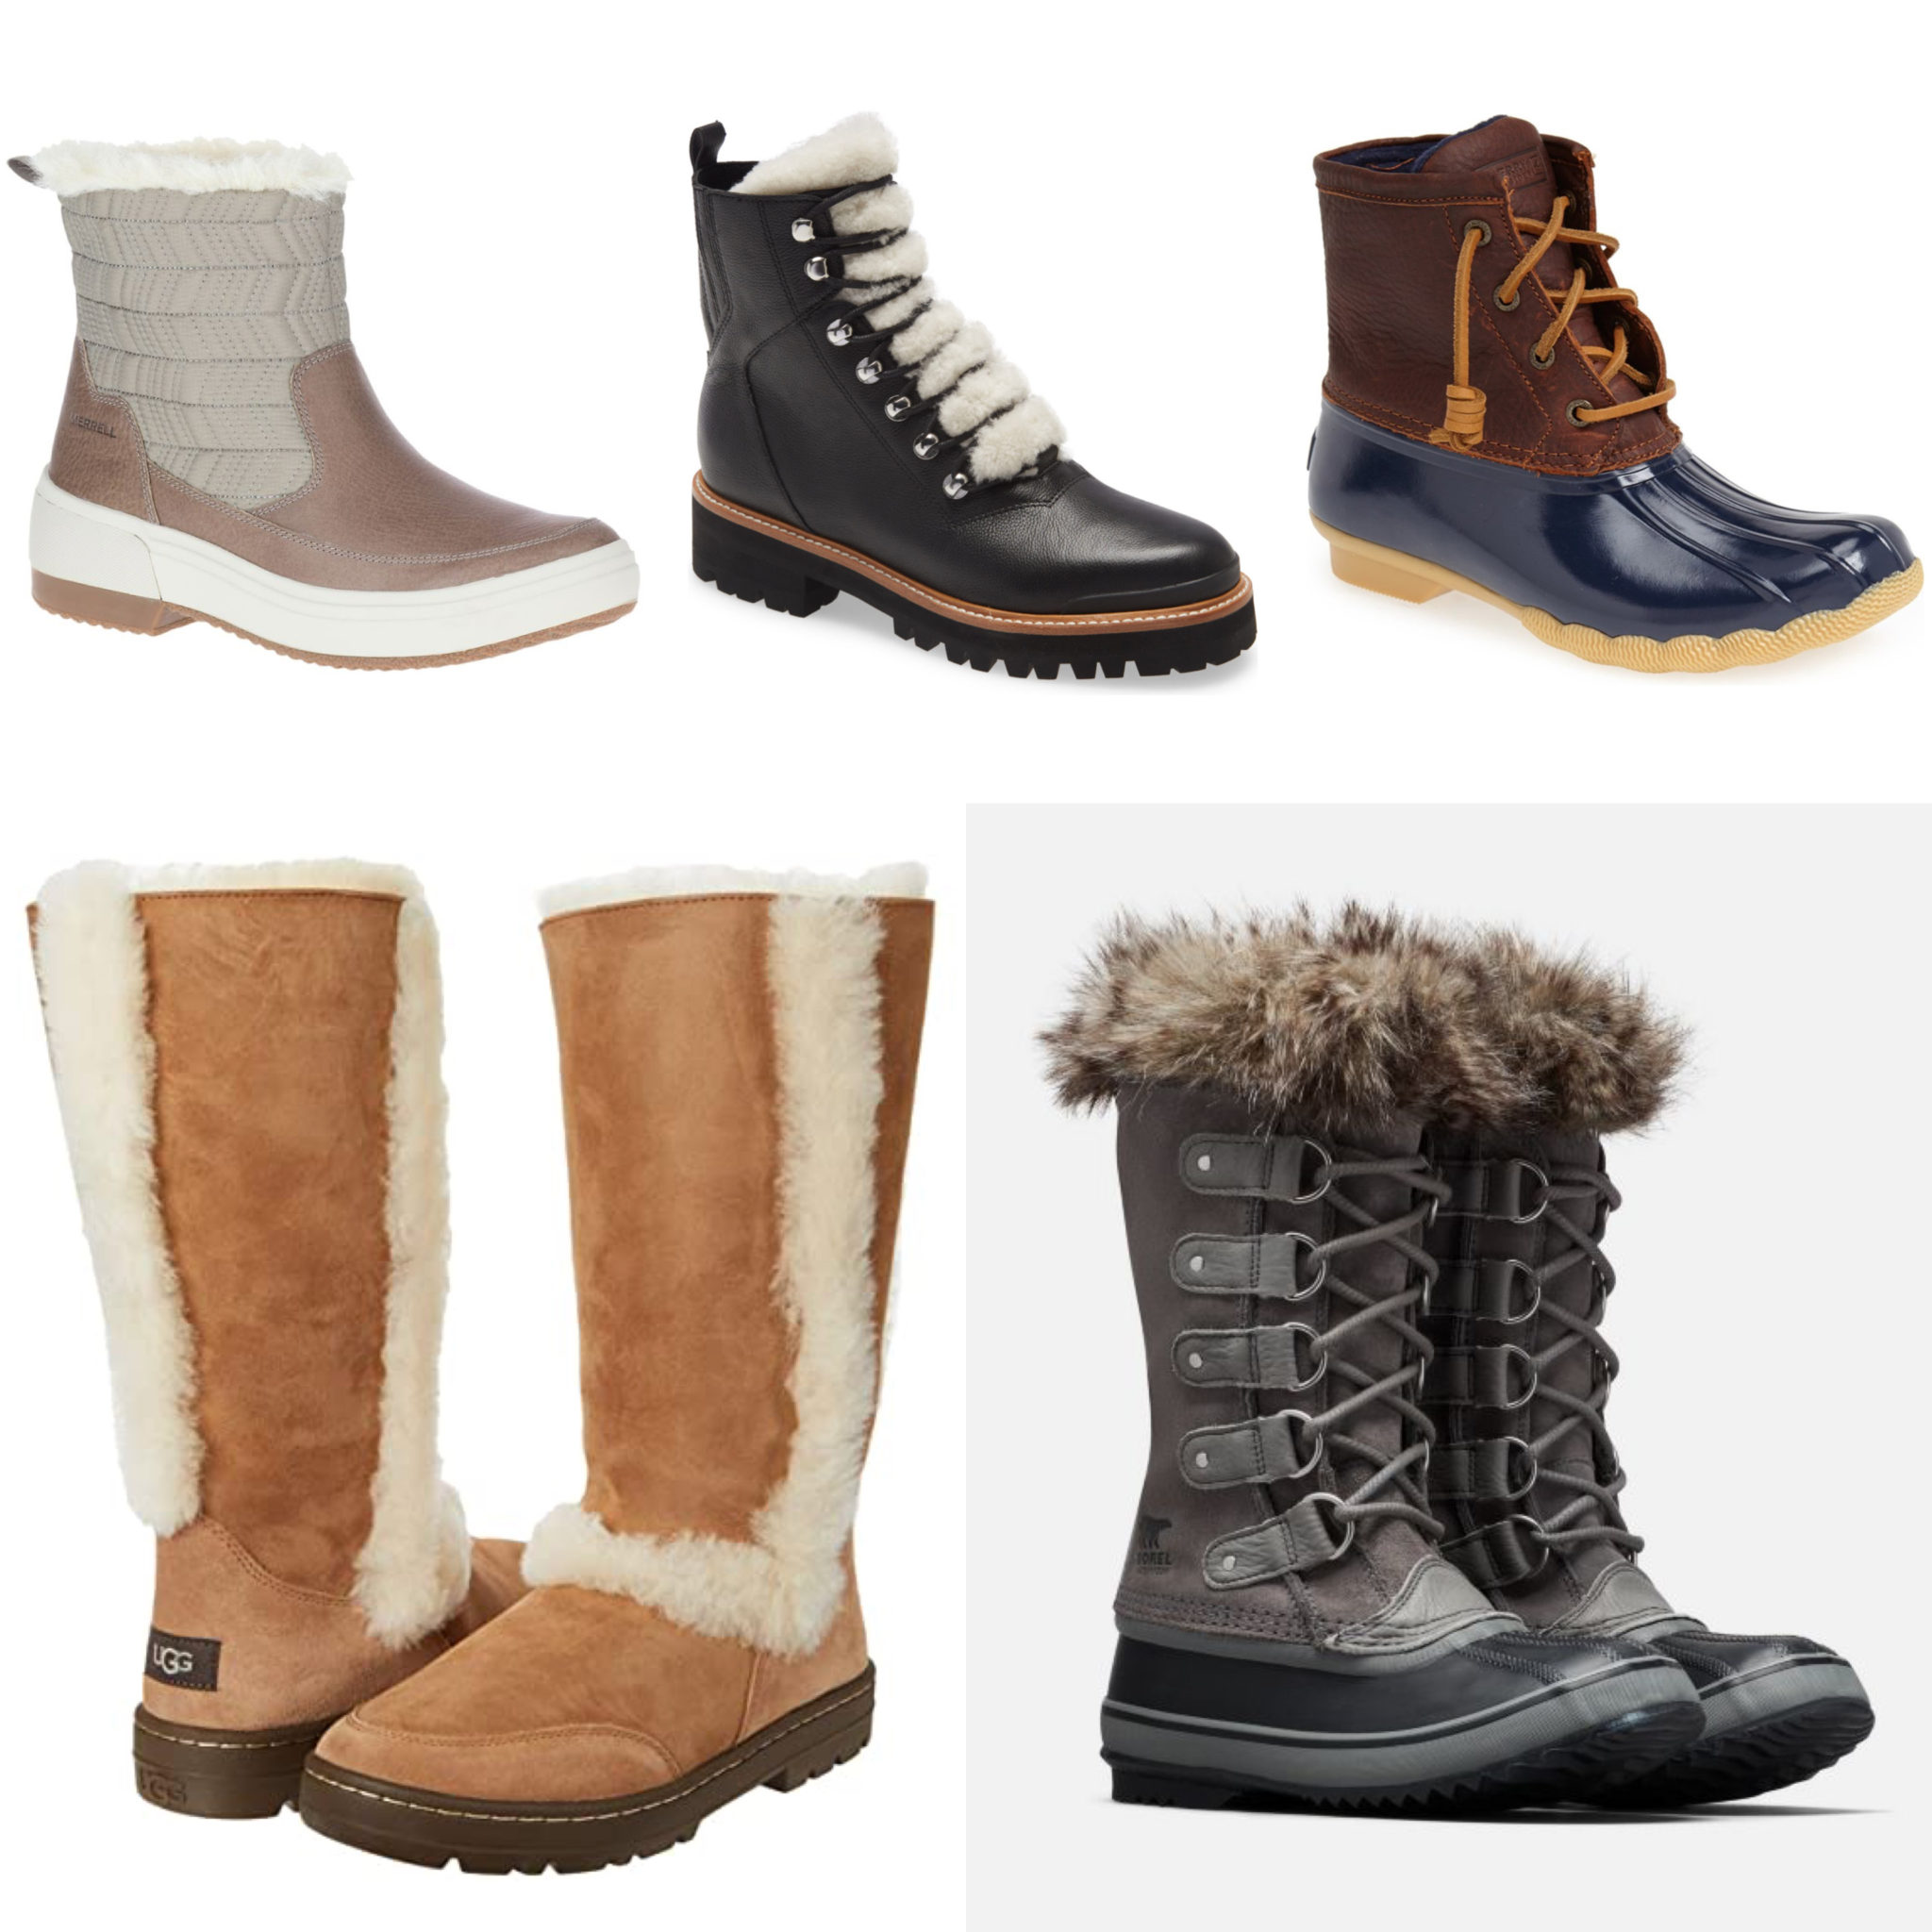 Outdoor Accessories for Winter Socializing - Effortless Style Nashville